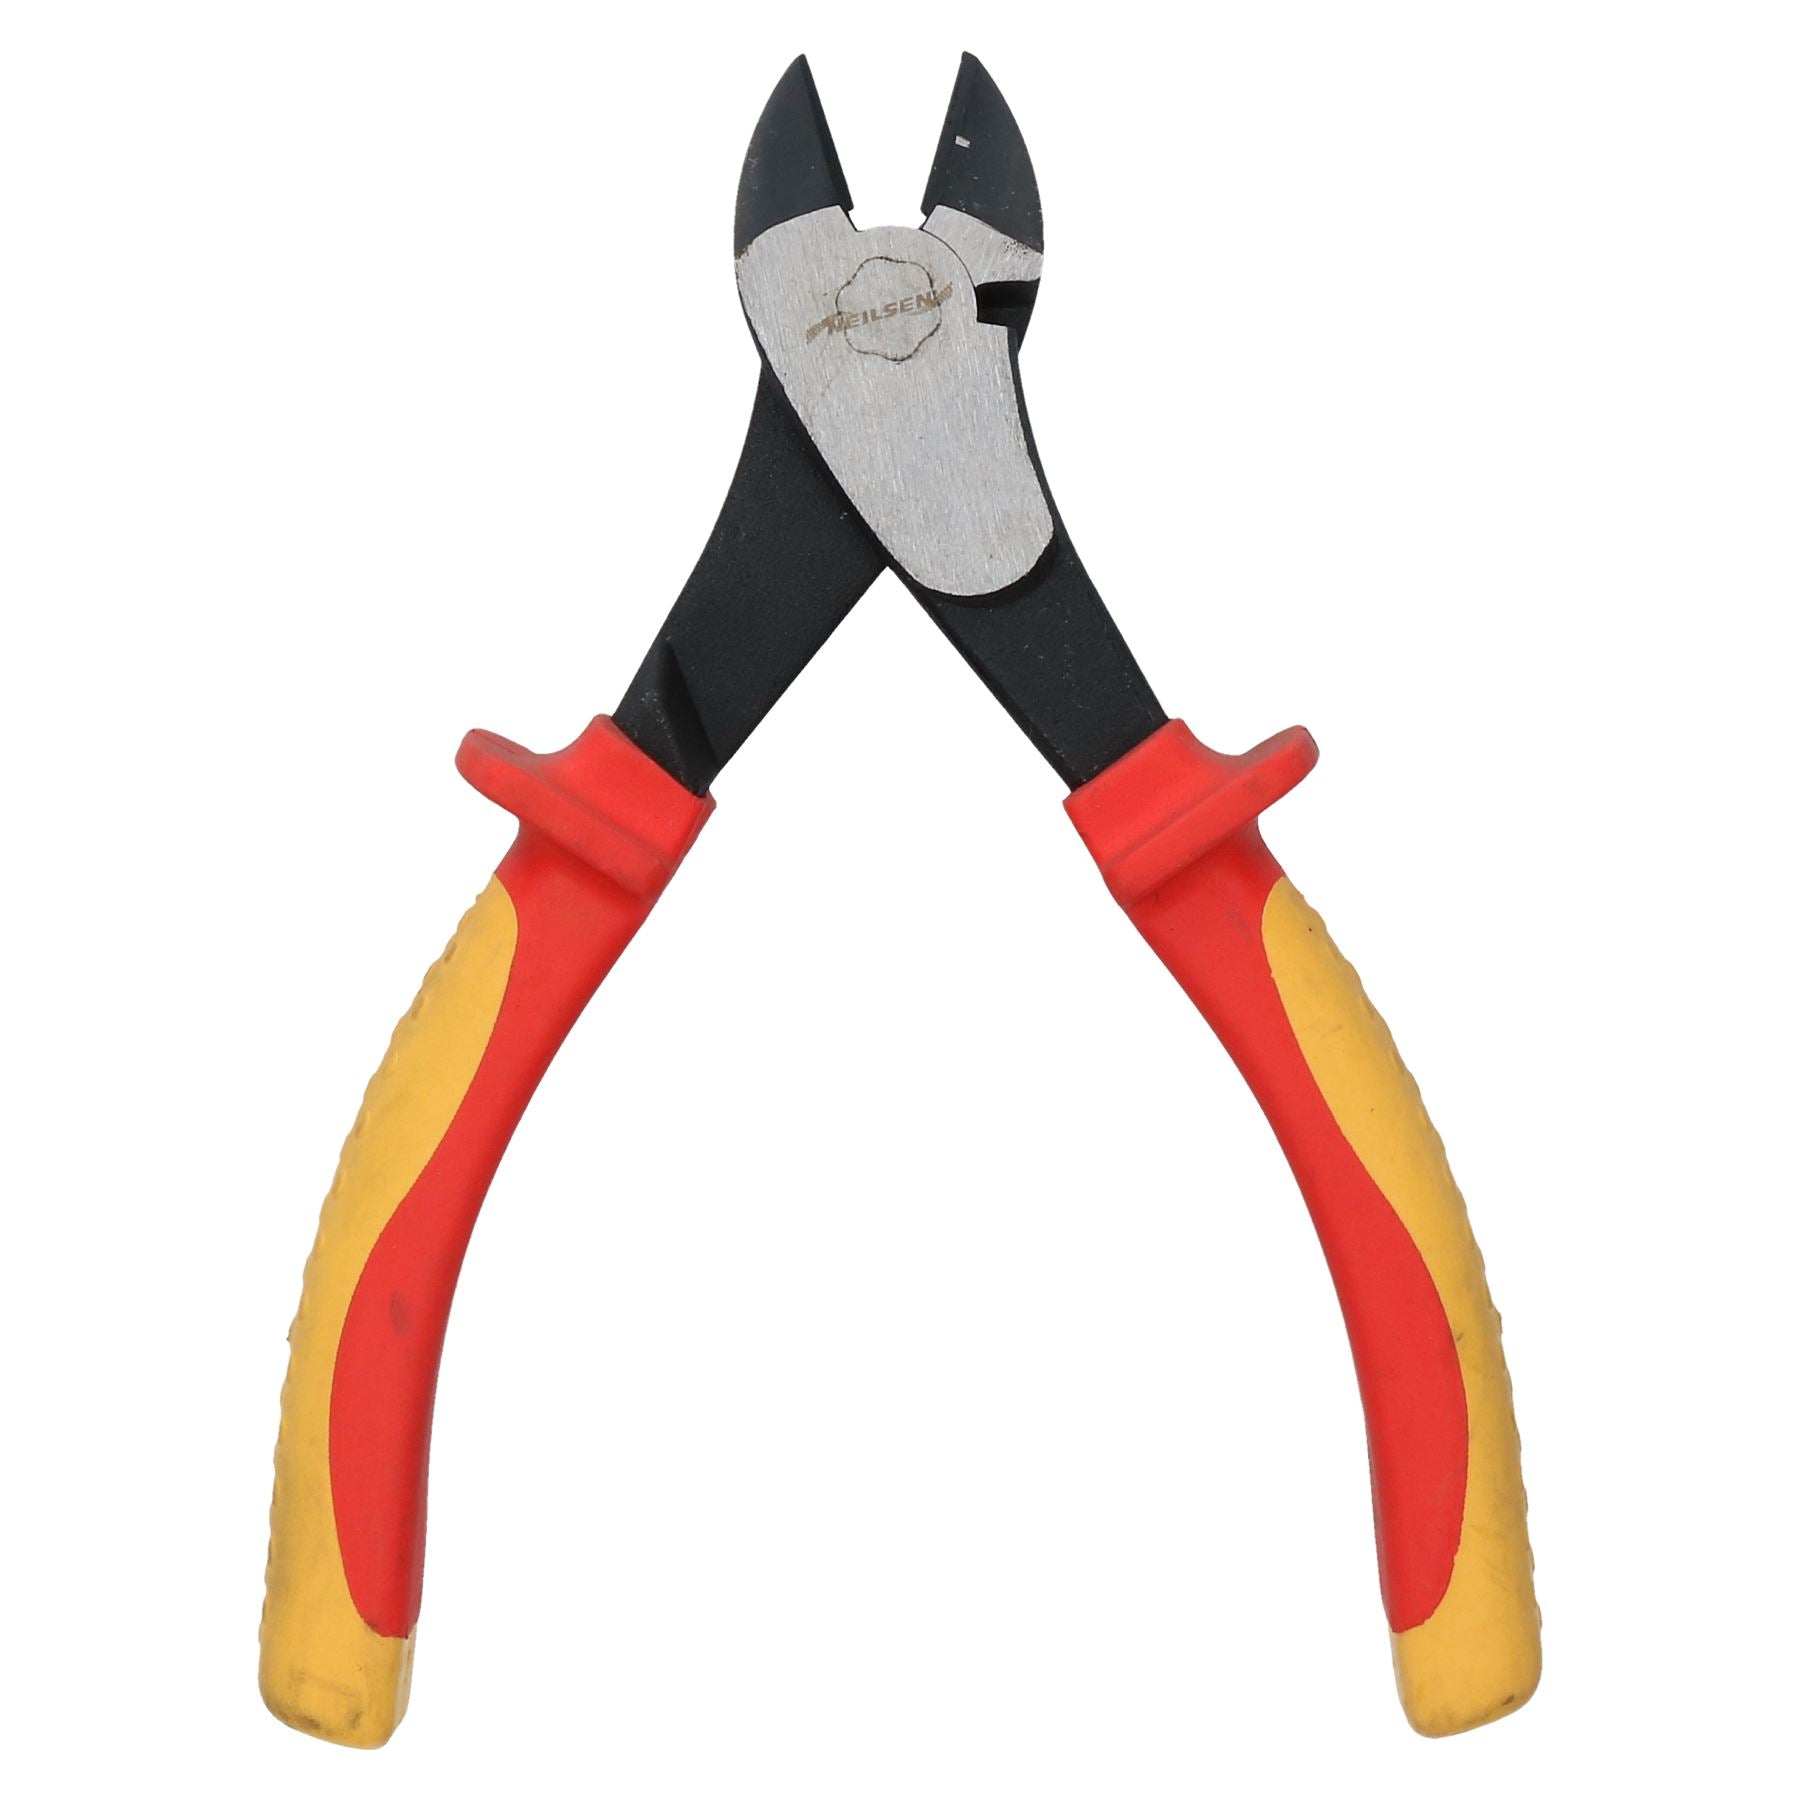 7" VDE Electrician Electrical Diagonal Side Wire Cutting Cutter Cut Snips Pliers